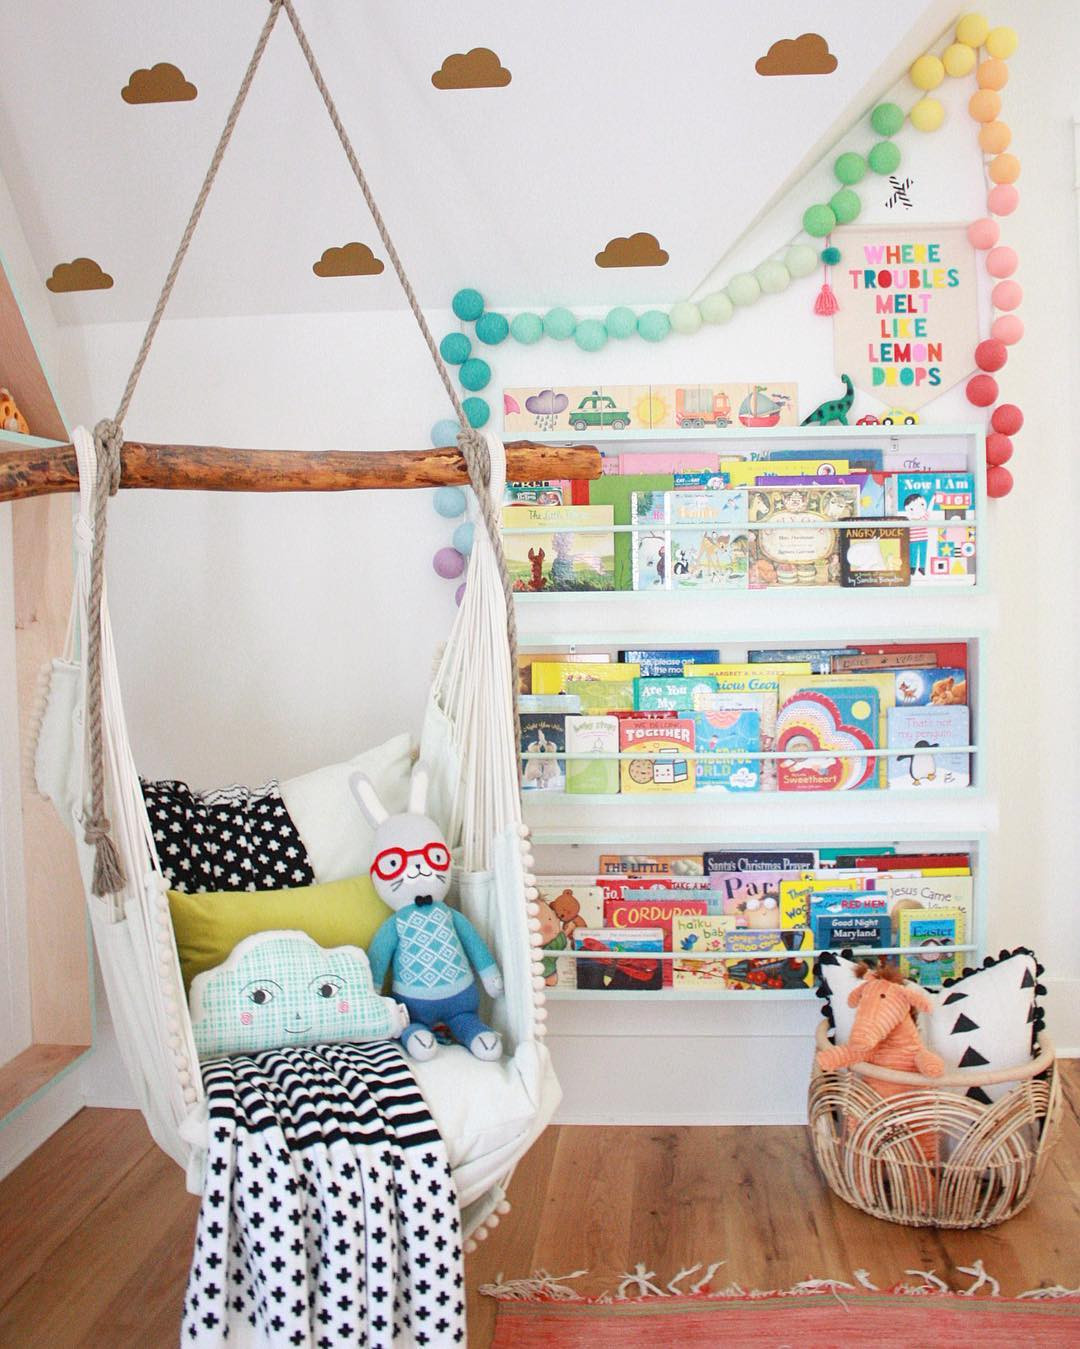 Kids Room Hammock
 Kids Room Hammock Ideas That You Would Wish To Have